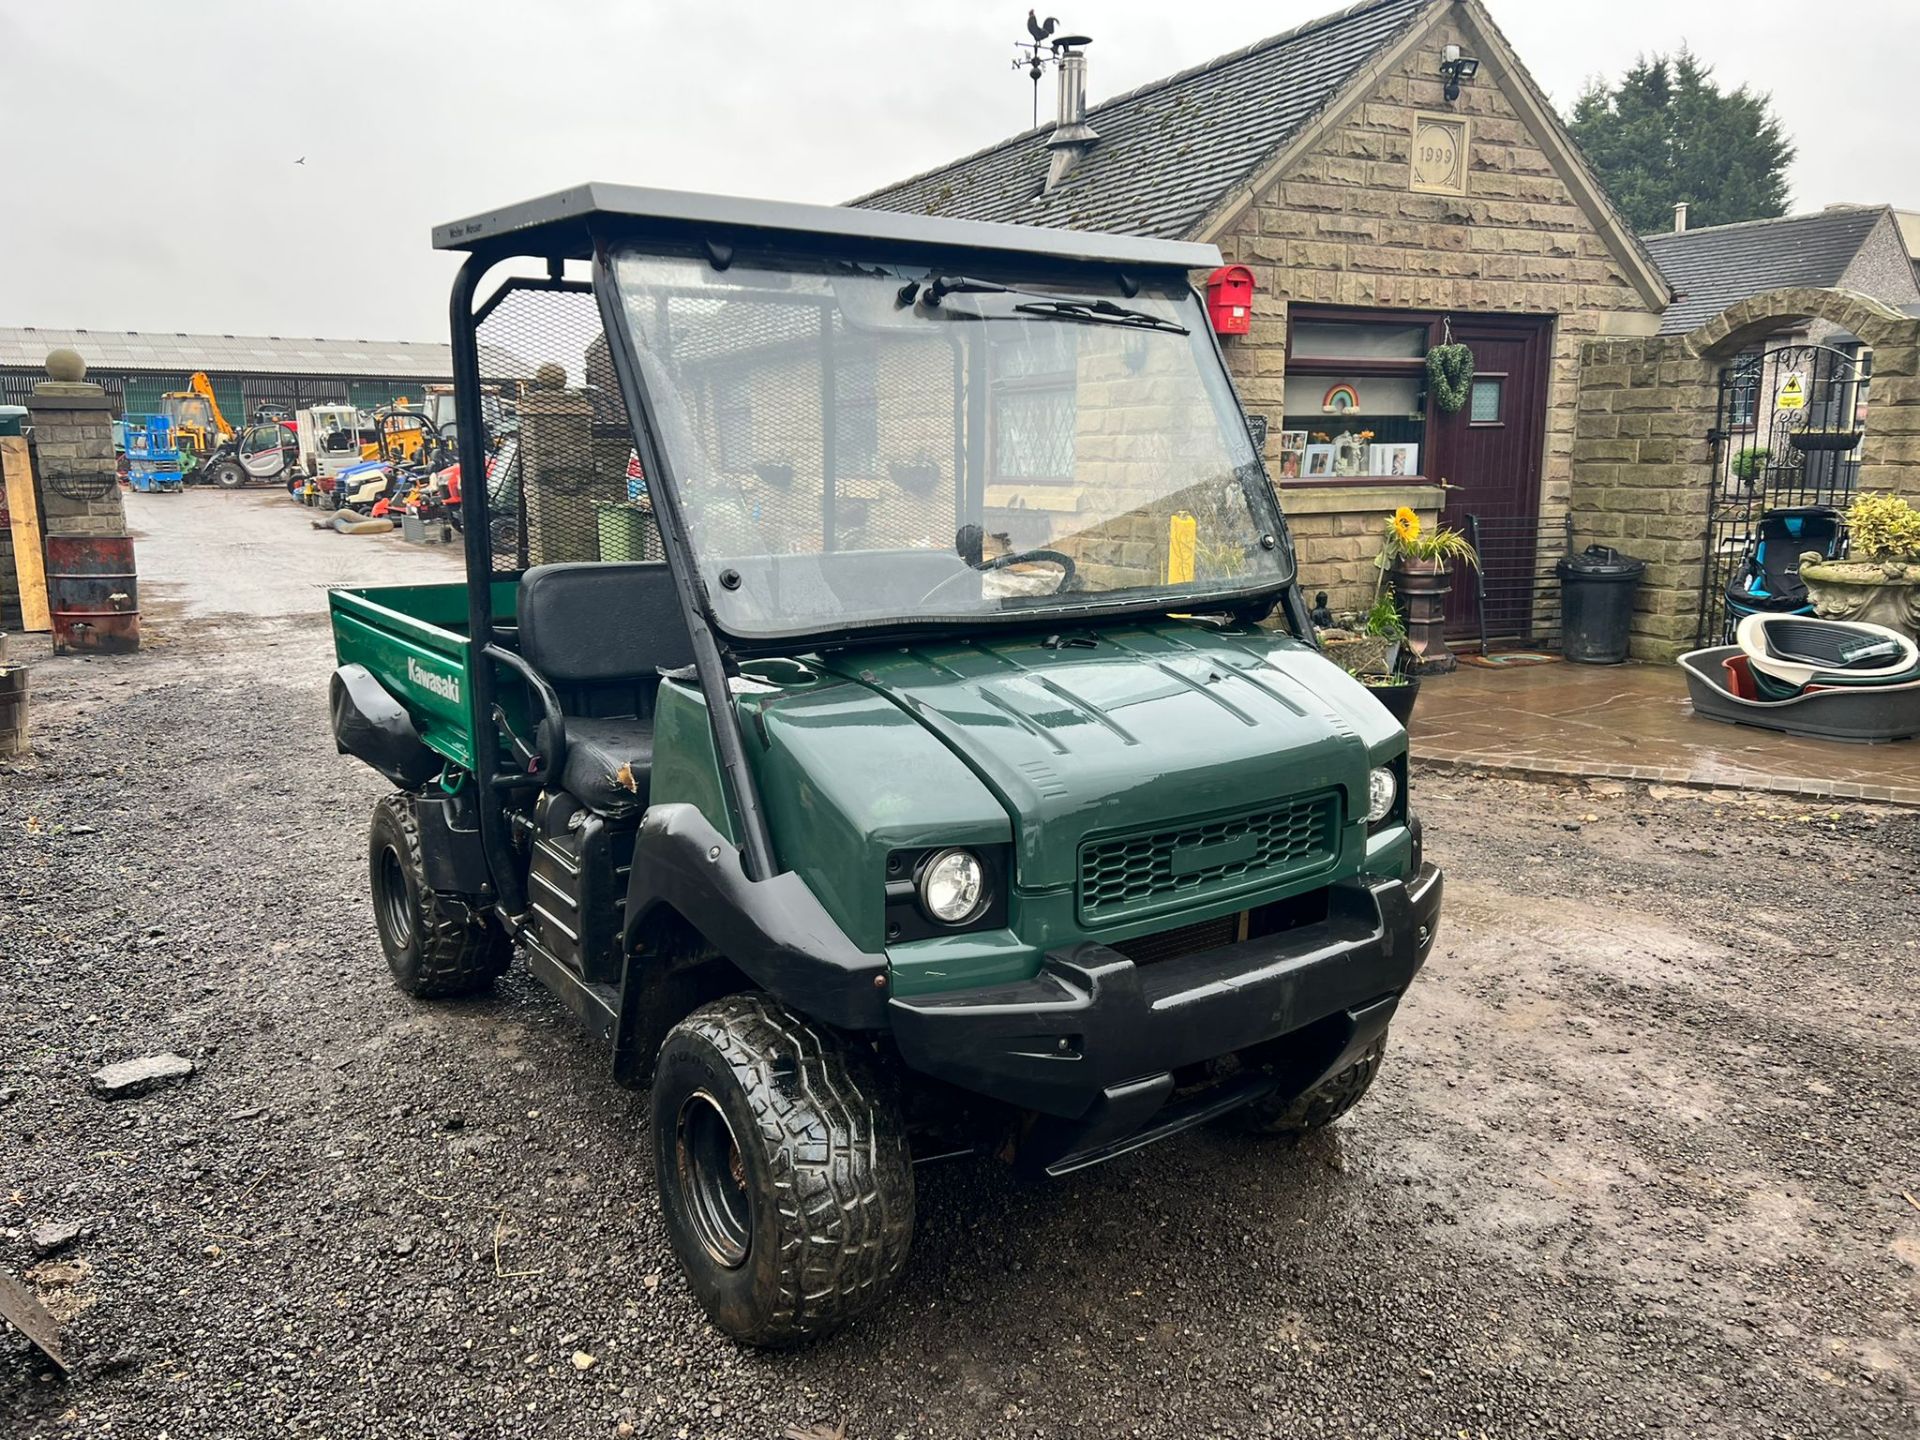 2009 Kawasaki Mule 4010 4WD Buggy/UTV, Runs And Drives, Showing A Low 2425 Hours! *PLUS VAT*